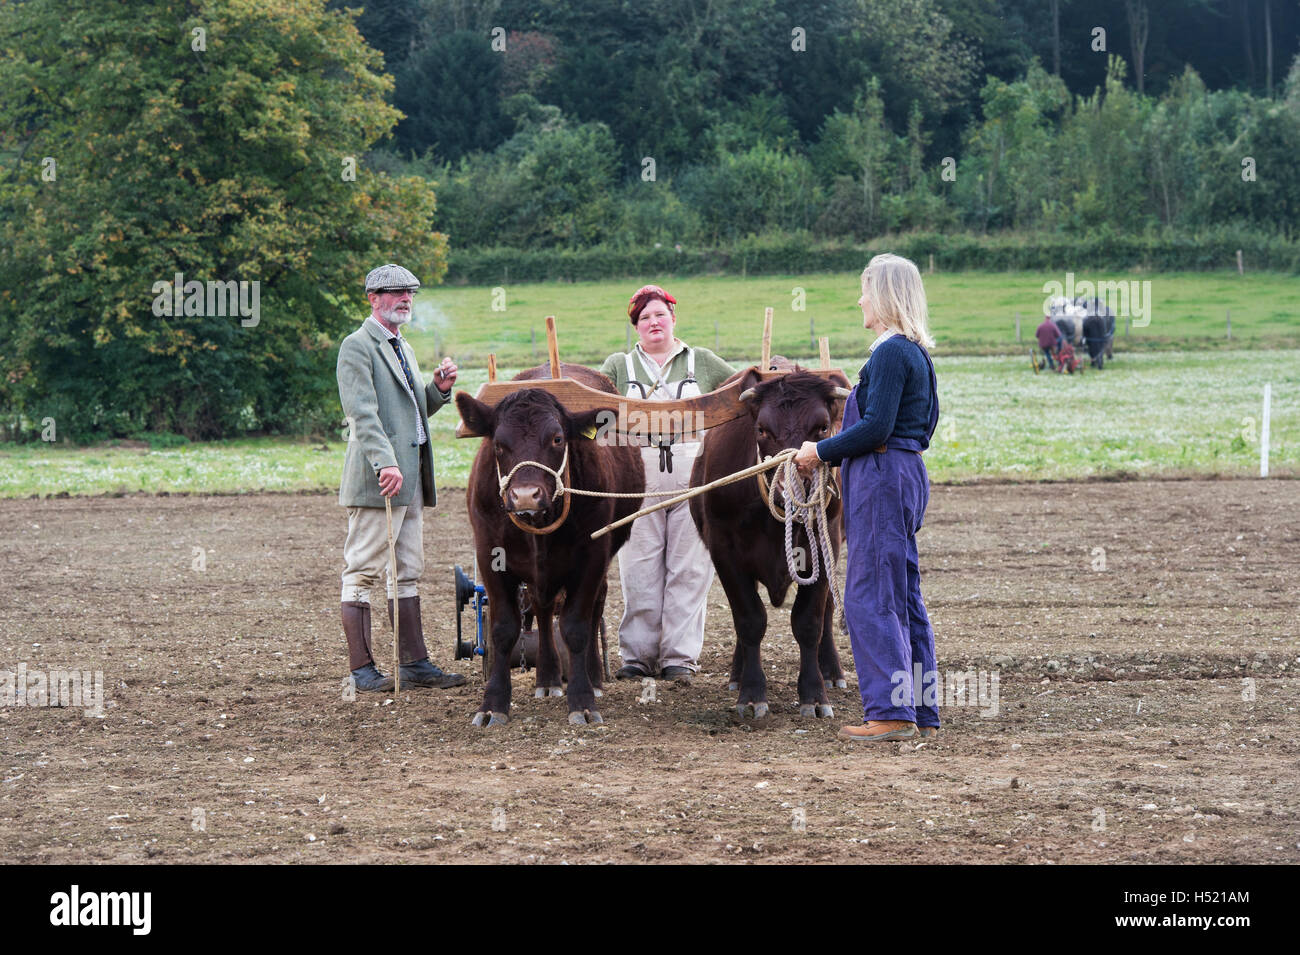 Working cattle at Weald and Downland open air museum, autumn countryside show, Singleton, Sussex, England Stock Photo